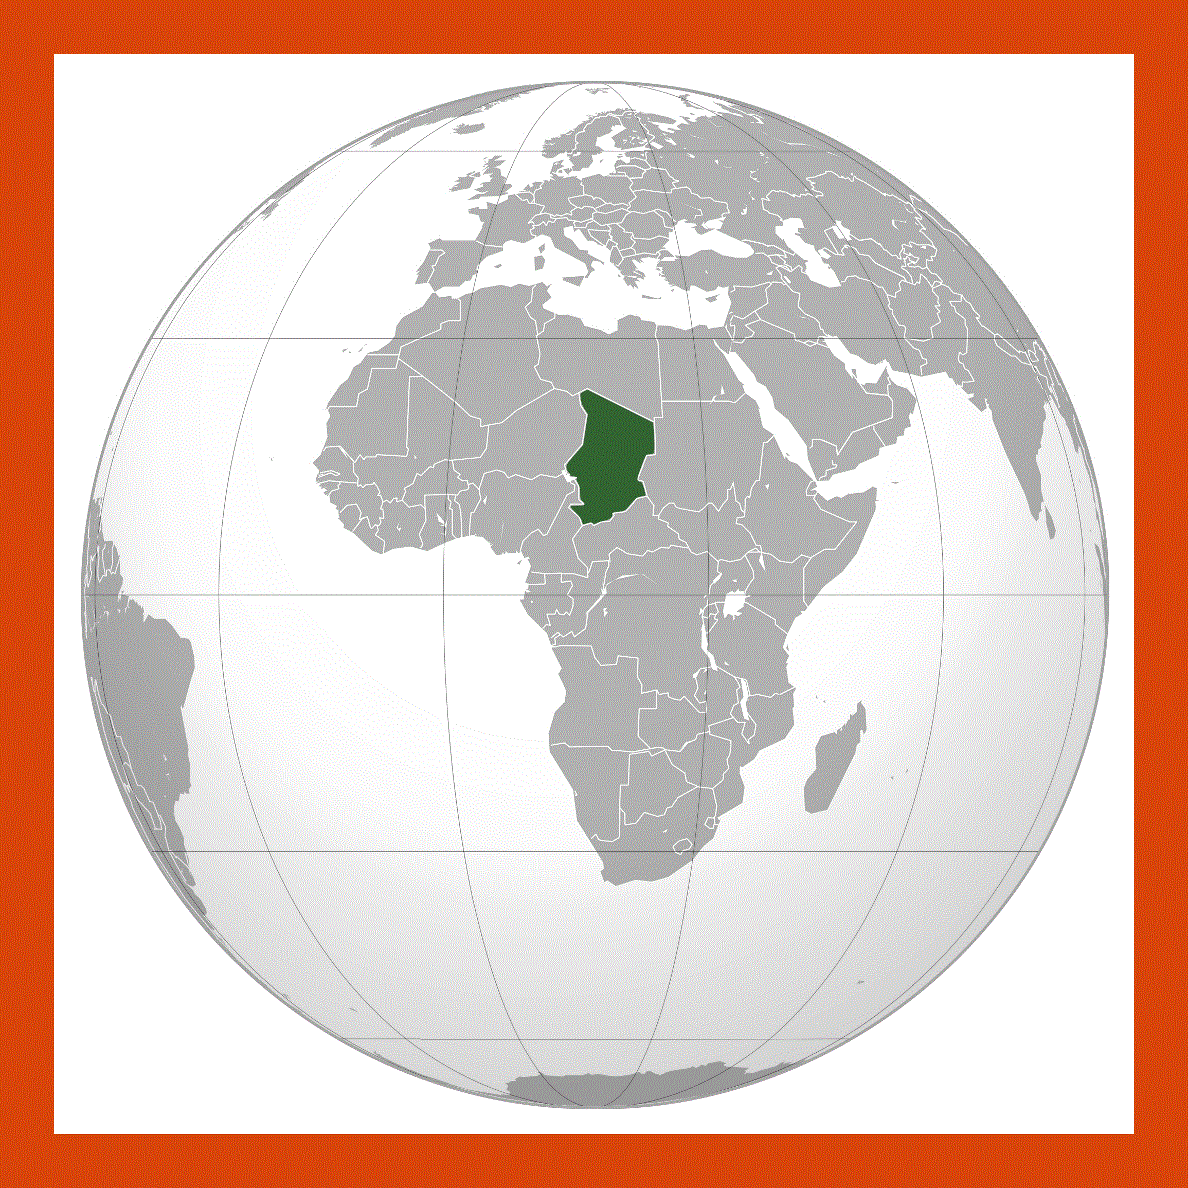 Location map of Chad in the World